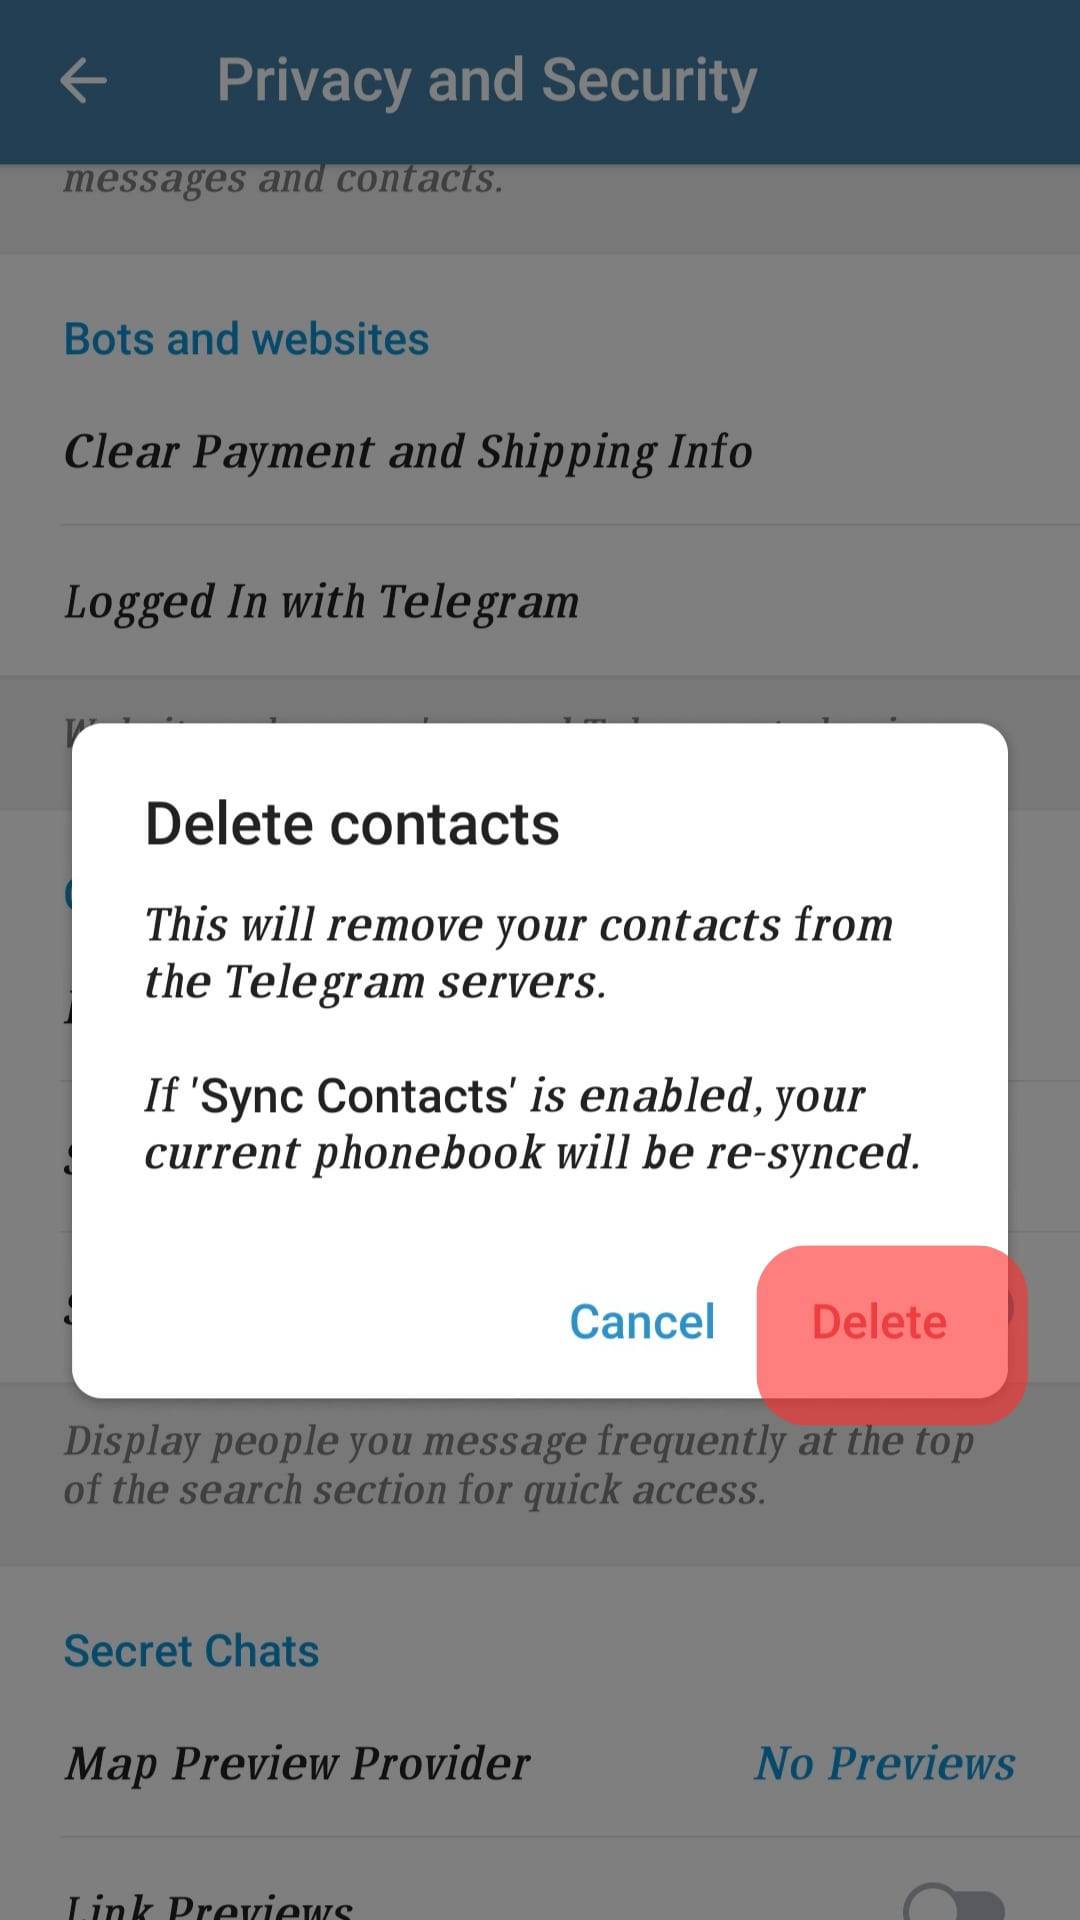 Confirm To Delete Contacts In Telegram